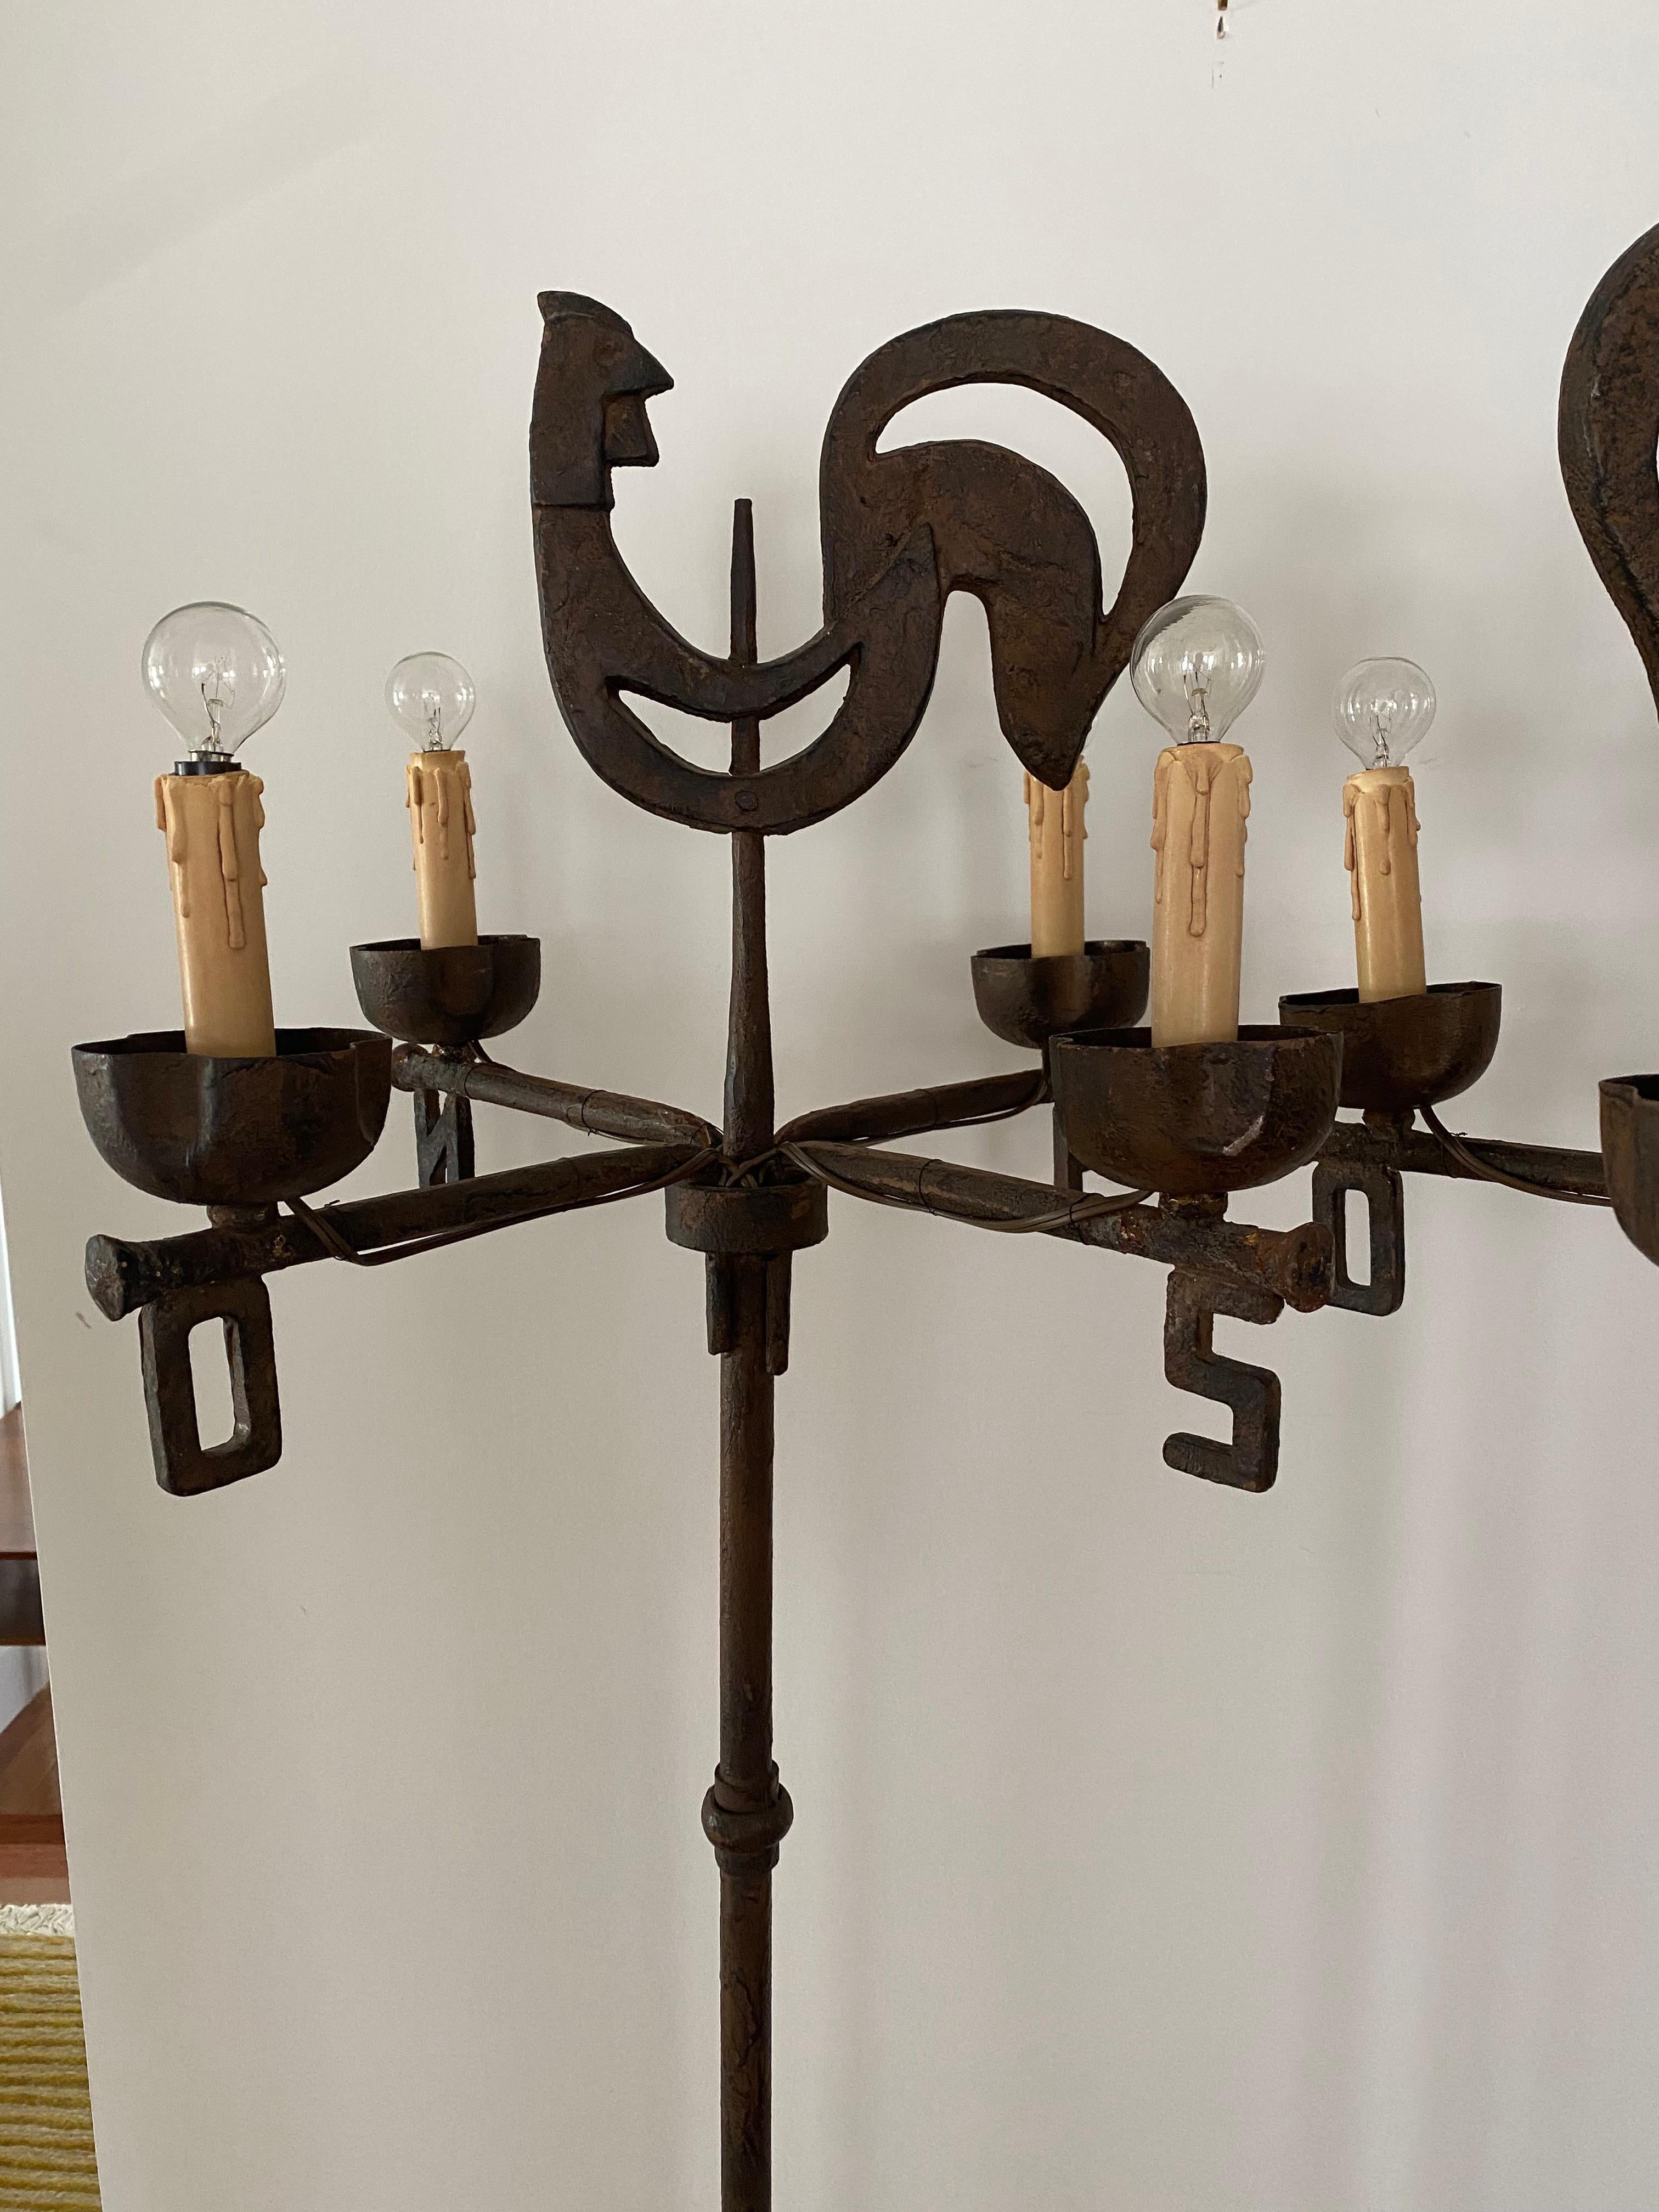 Pair of handcrafted pair of cast and wrought iron by Ateliers de Marolles under the direction of Jean Touret. The studio in South France designed and crafted lighting and furniture during the 1950s.

This pair has a rooster weather vane motifs and